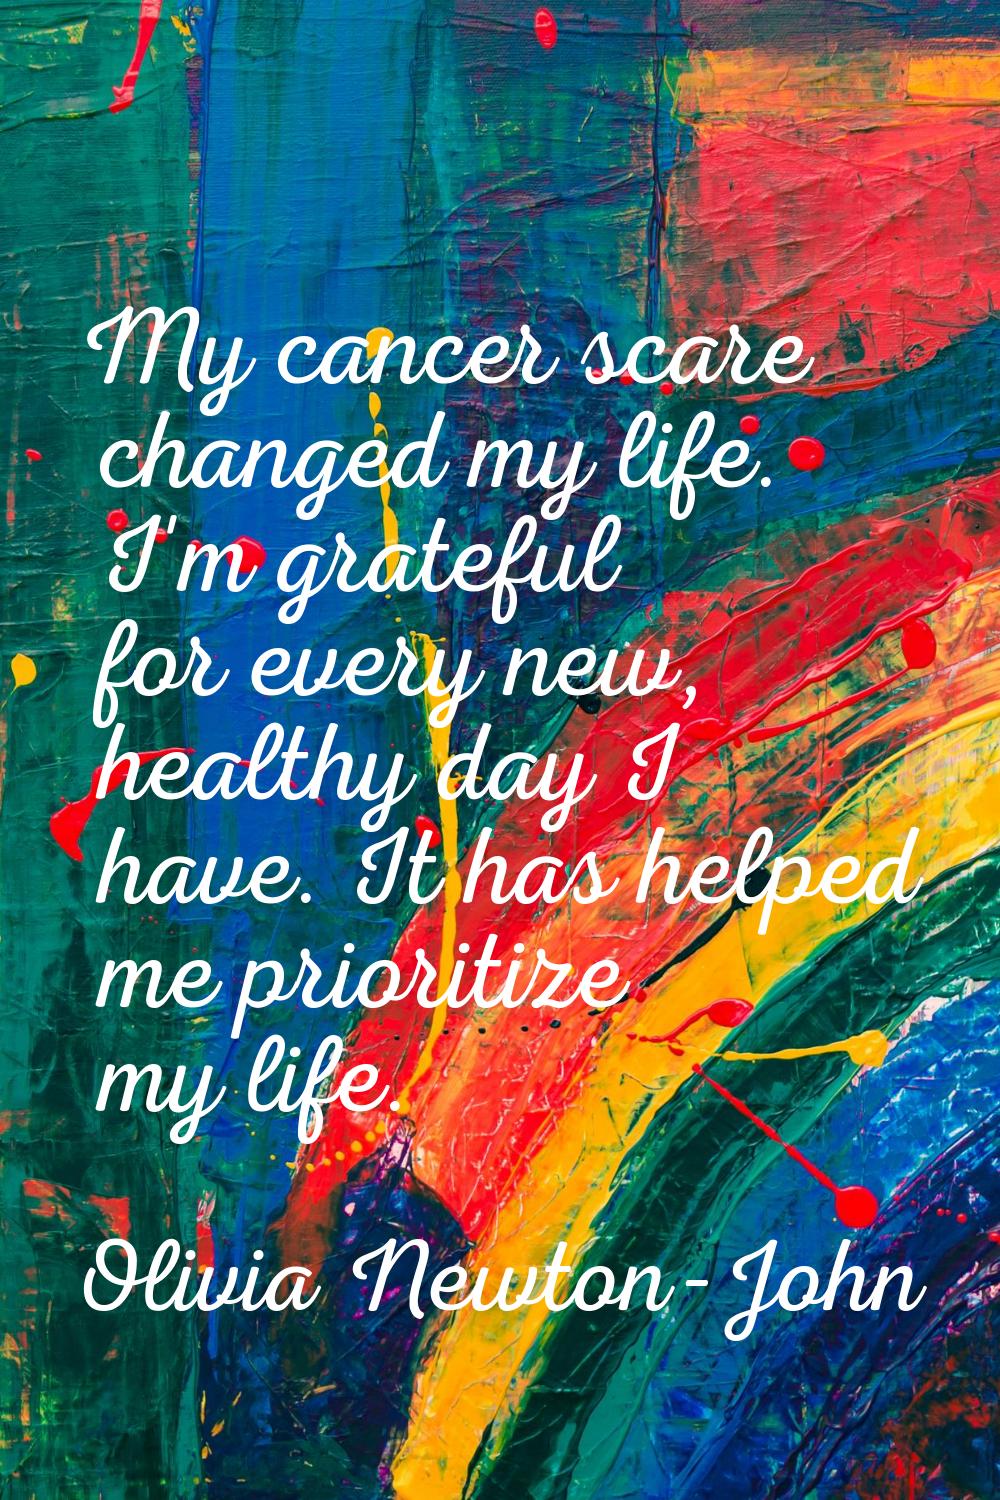 My cancer scare changed my life. I'm grateful for every new, healthy day I have. It has helped me p